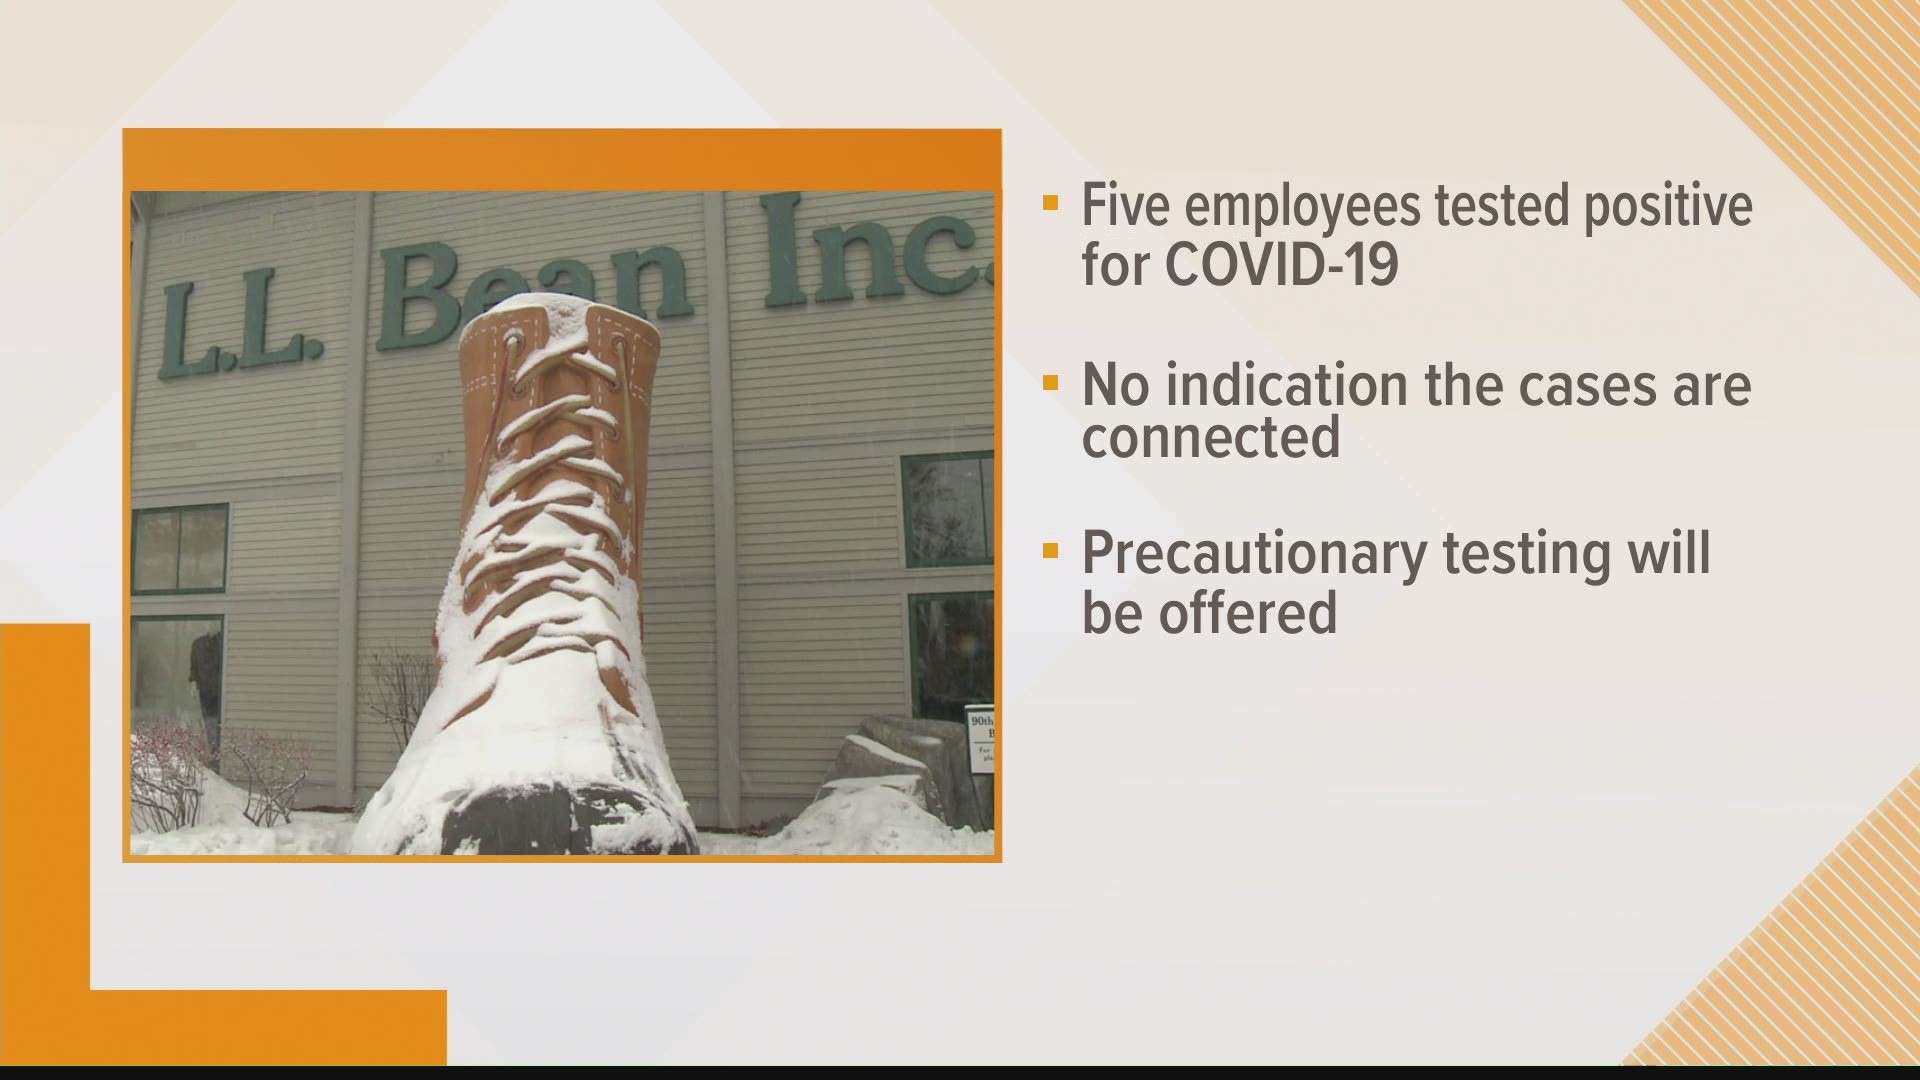 5 employees at the L.L. Bean Fulfillment Center in Freeport have test positive for COVID-19.